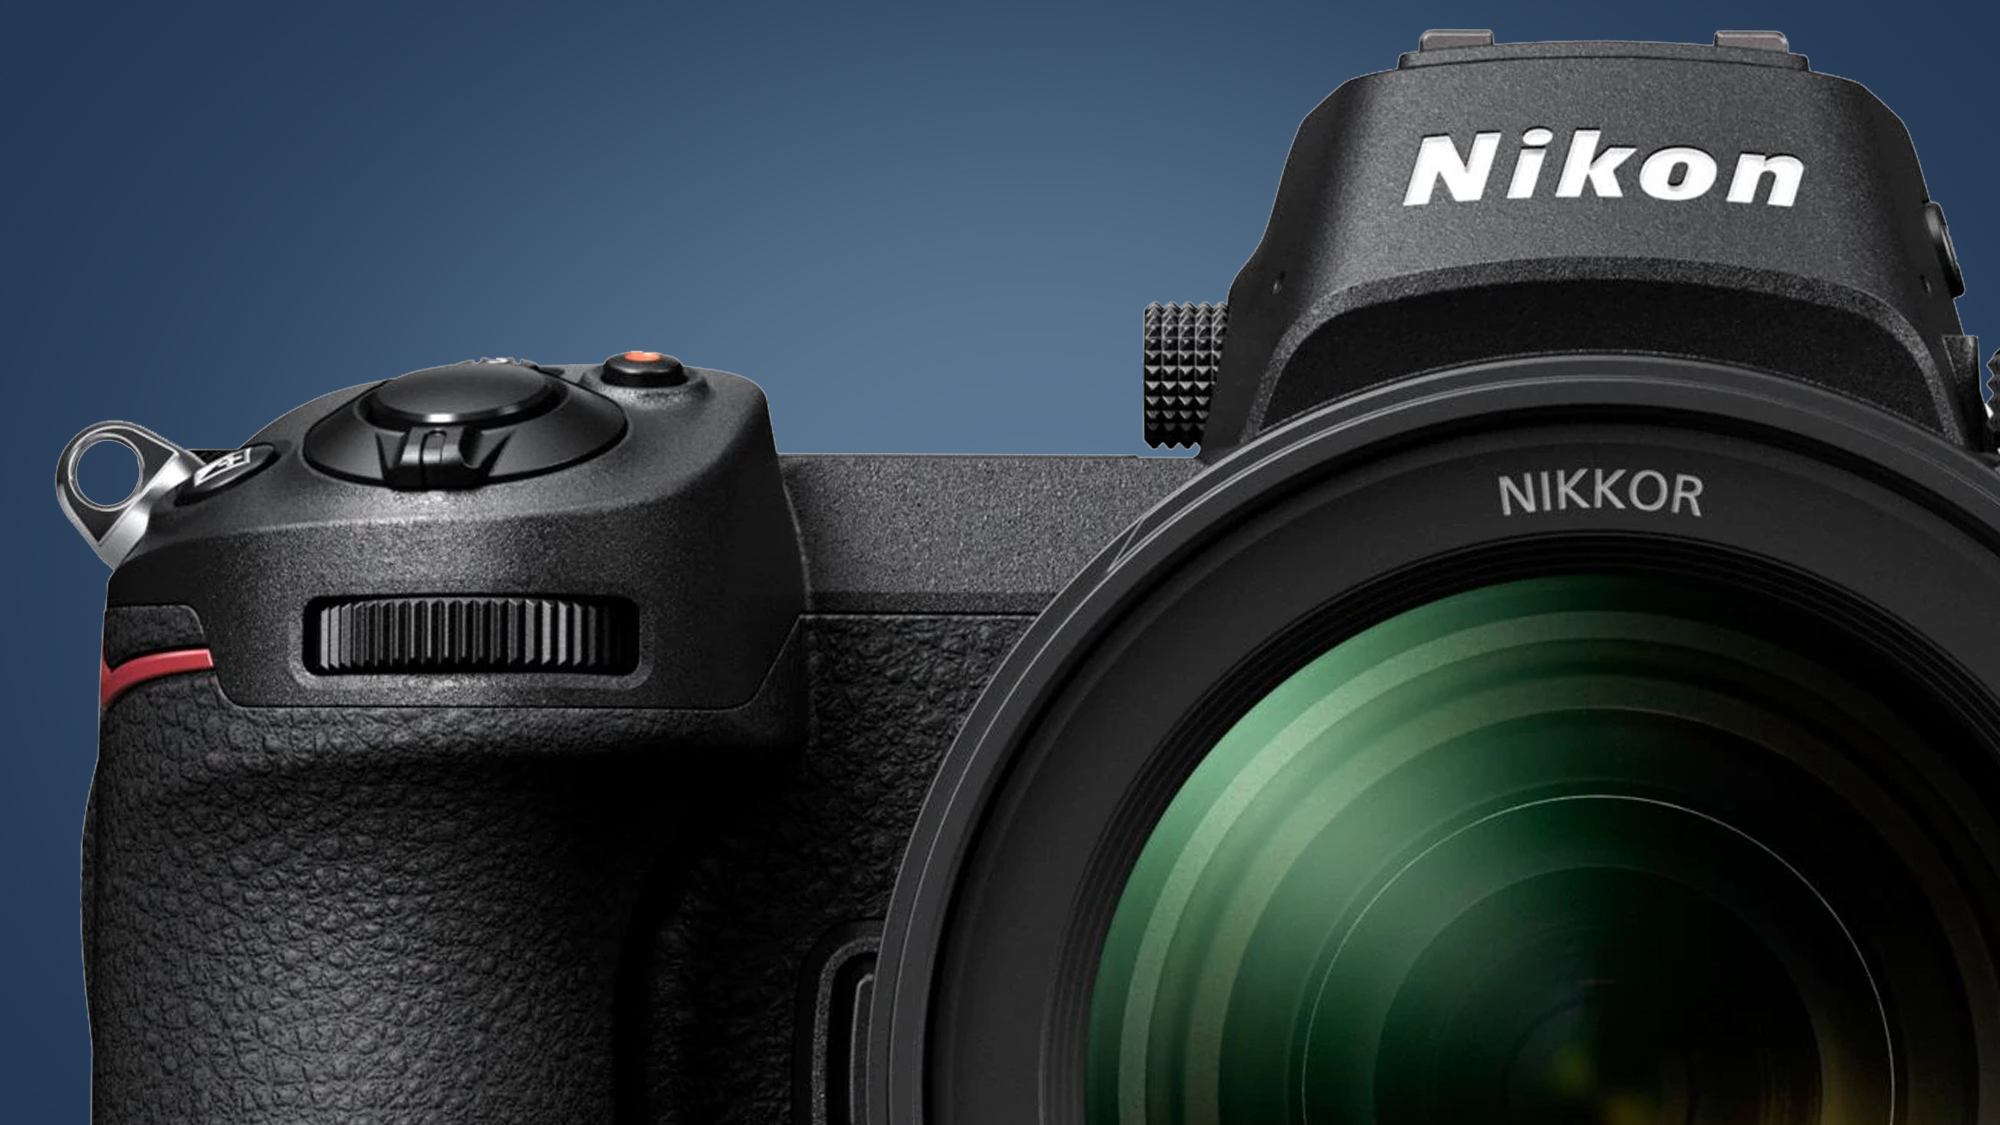 Another set of rumored Nikon Z6 III camera specifications - Nikon Rumors